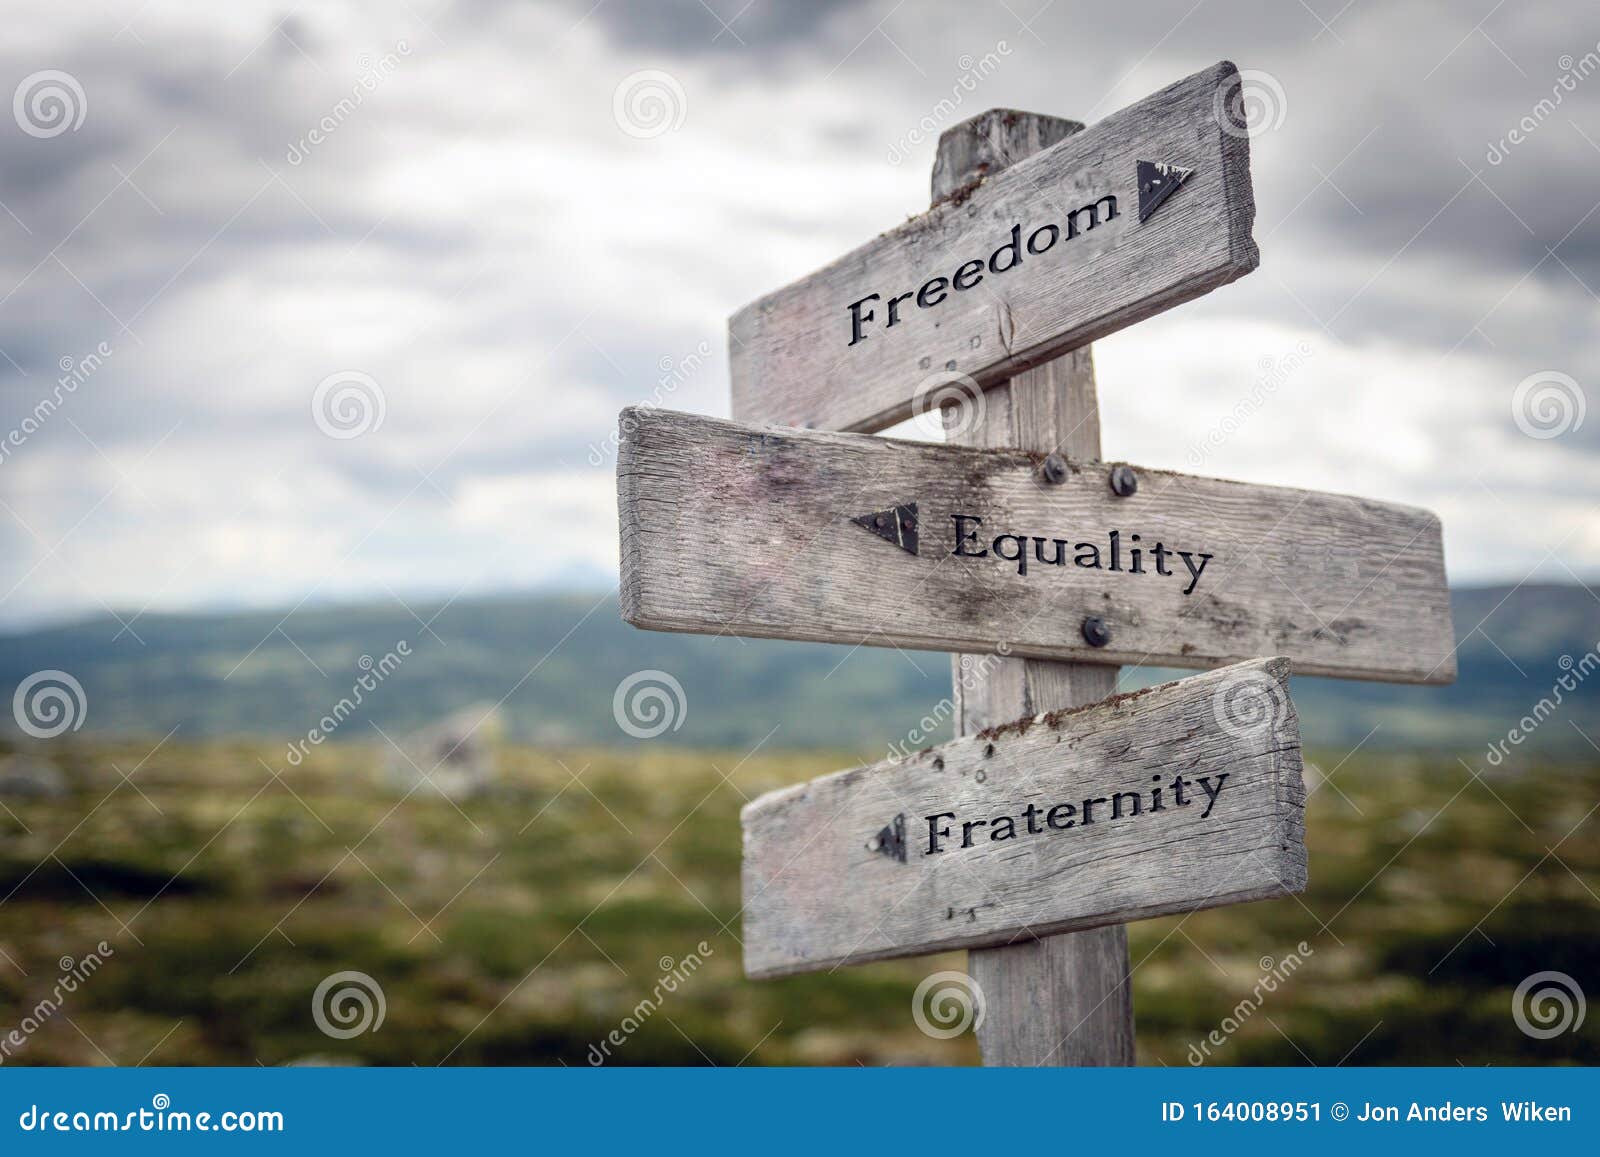 Freedom, Equality Fraternity Text on Wooden Sign Post Outdoors in Landscape Scenery. Stock Image - Image of government, information: 164008951